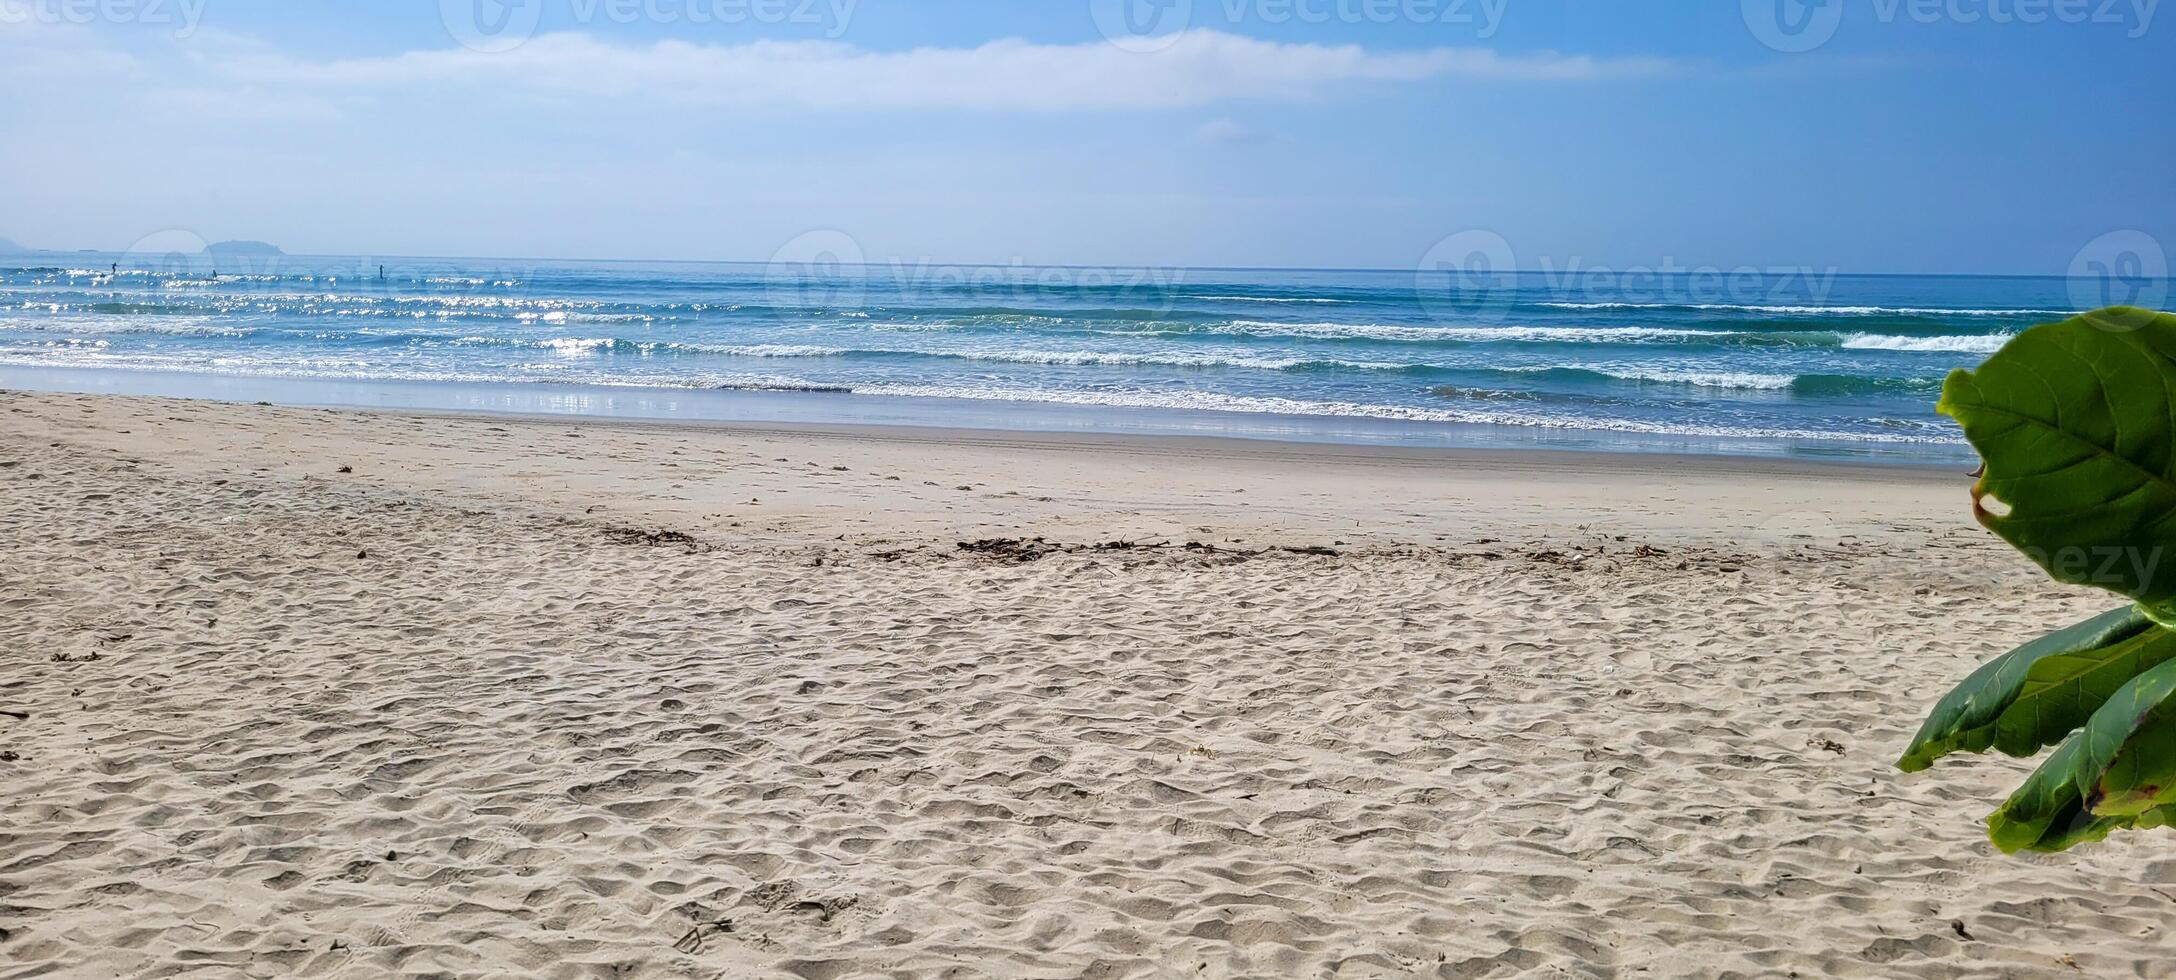 image of beach with white sand and calm sea on sunny day with bathers and surfers on the beach photo